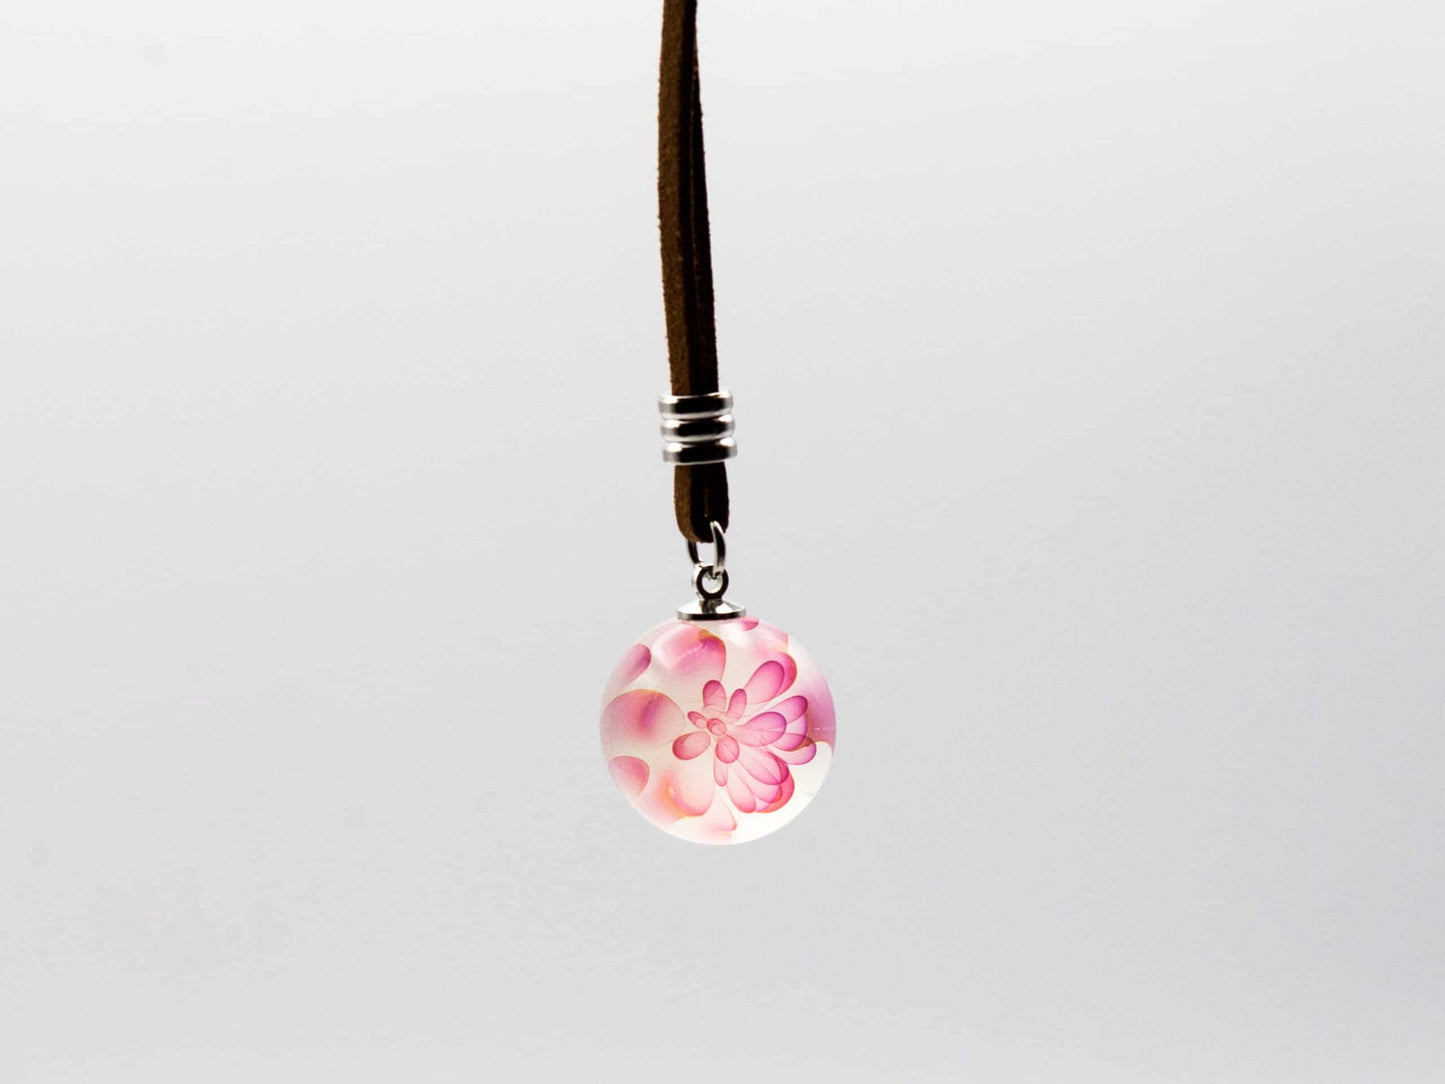 exquisite glass pendant - (CS2) Small White Cherry Blossom Pendant by ColorWorks